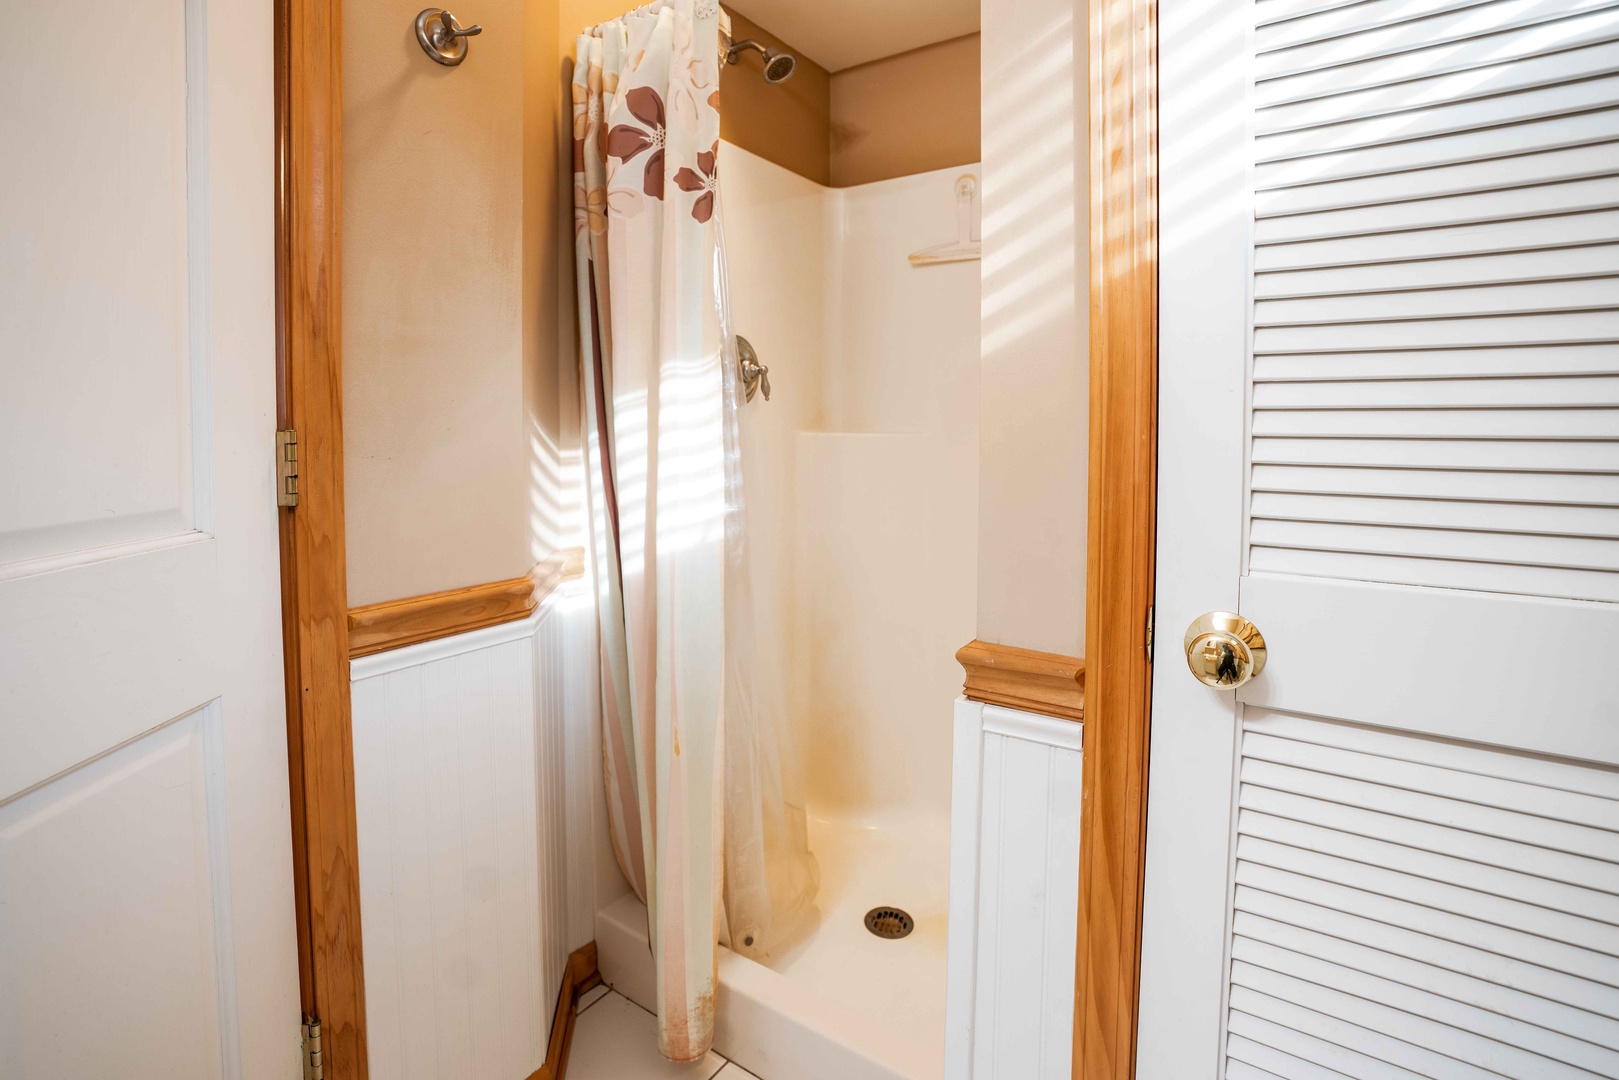 This full bath in the guest house offers a walk-in shower & single vanity